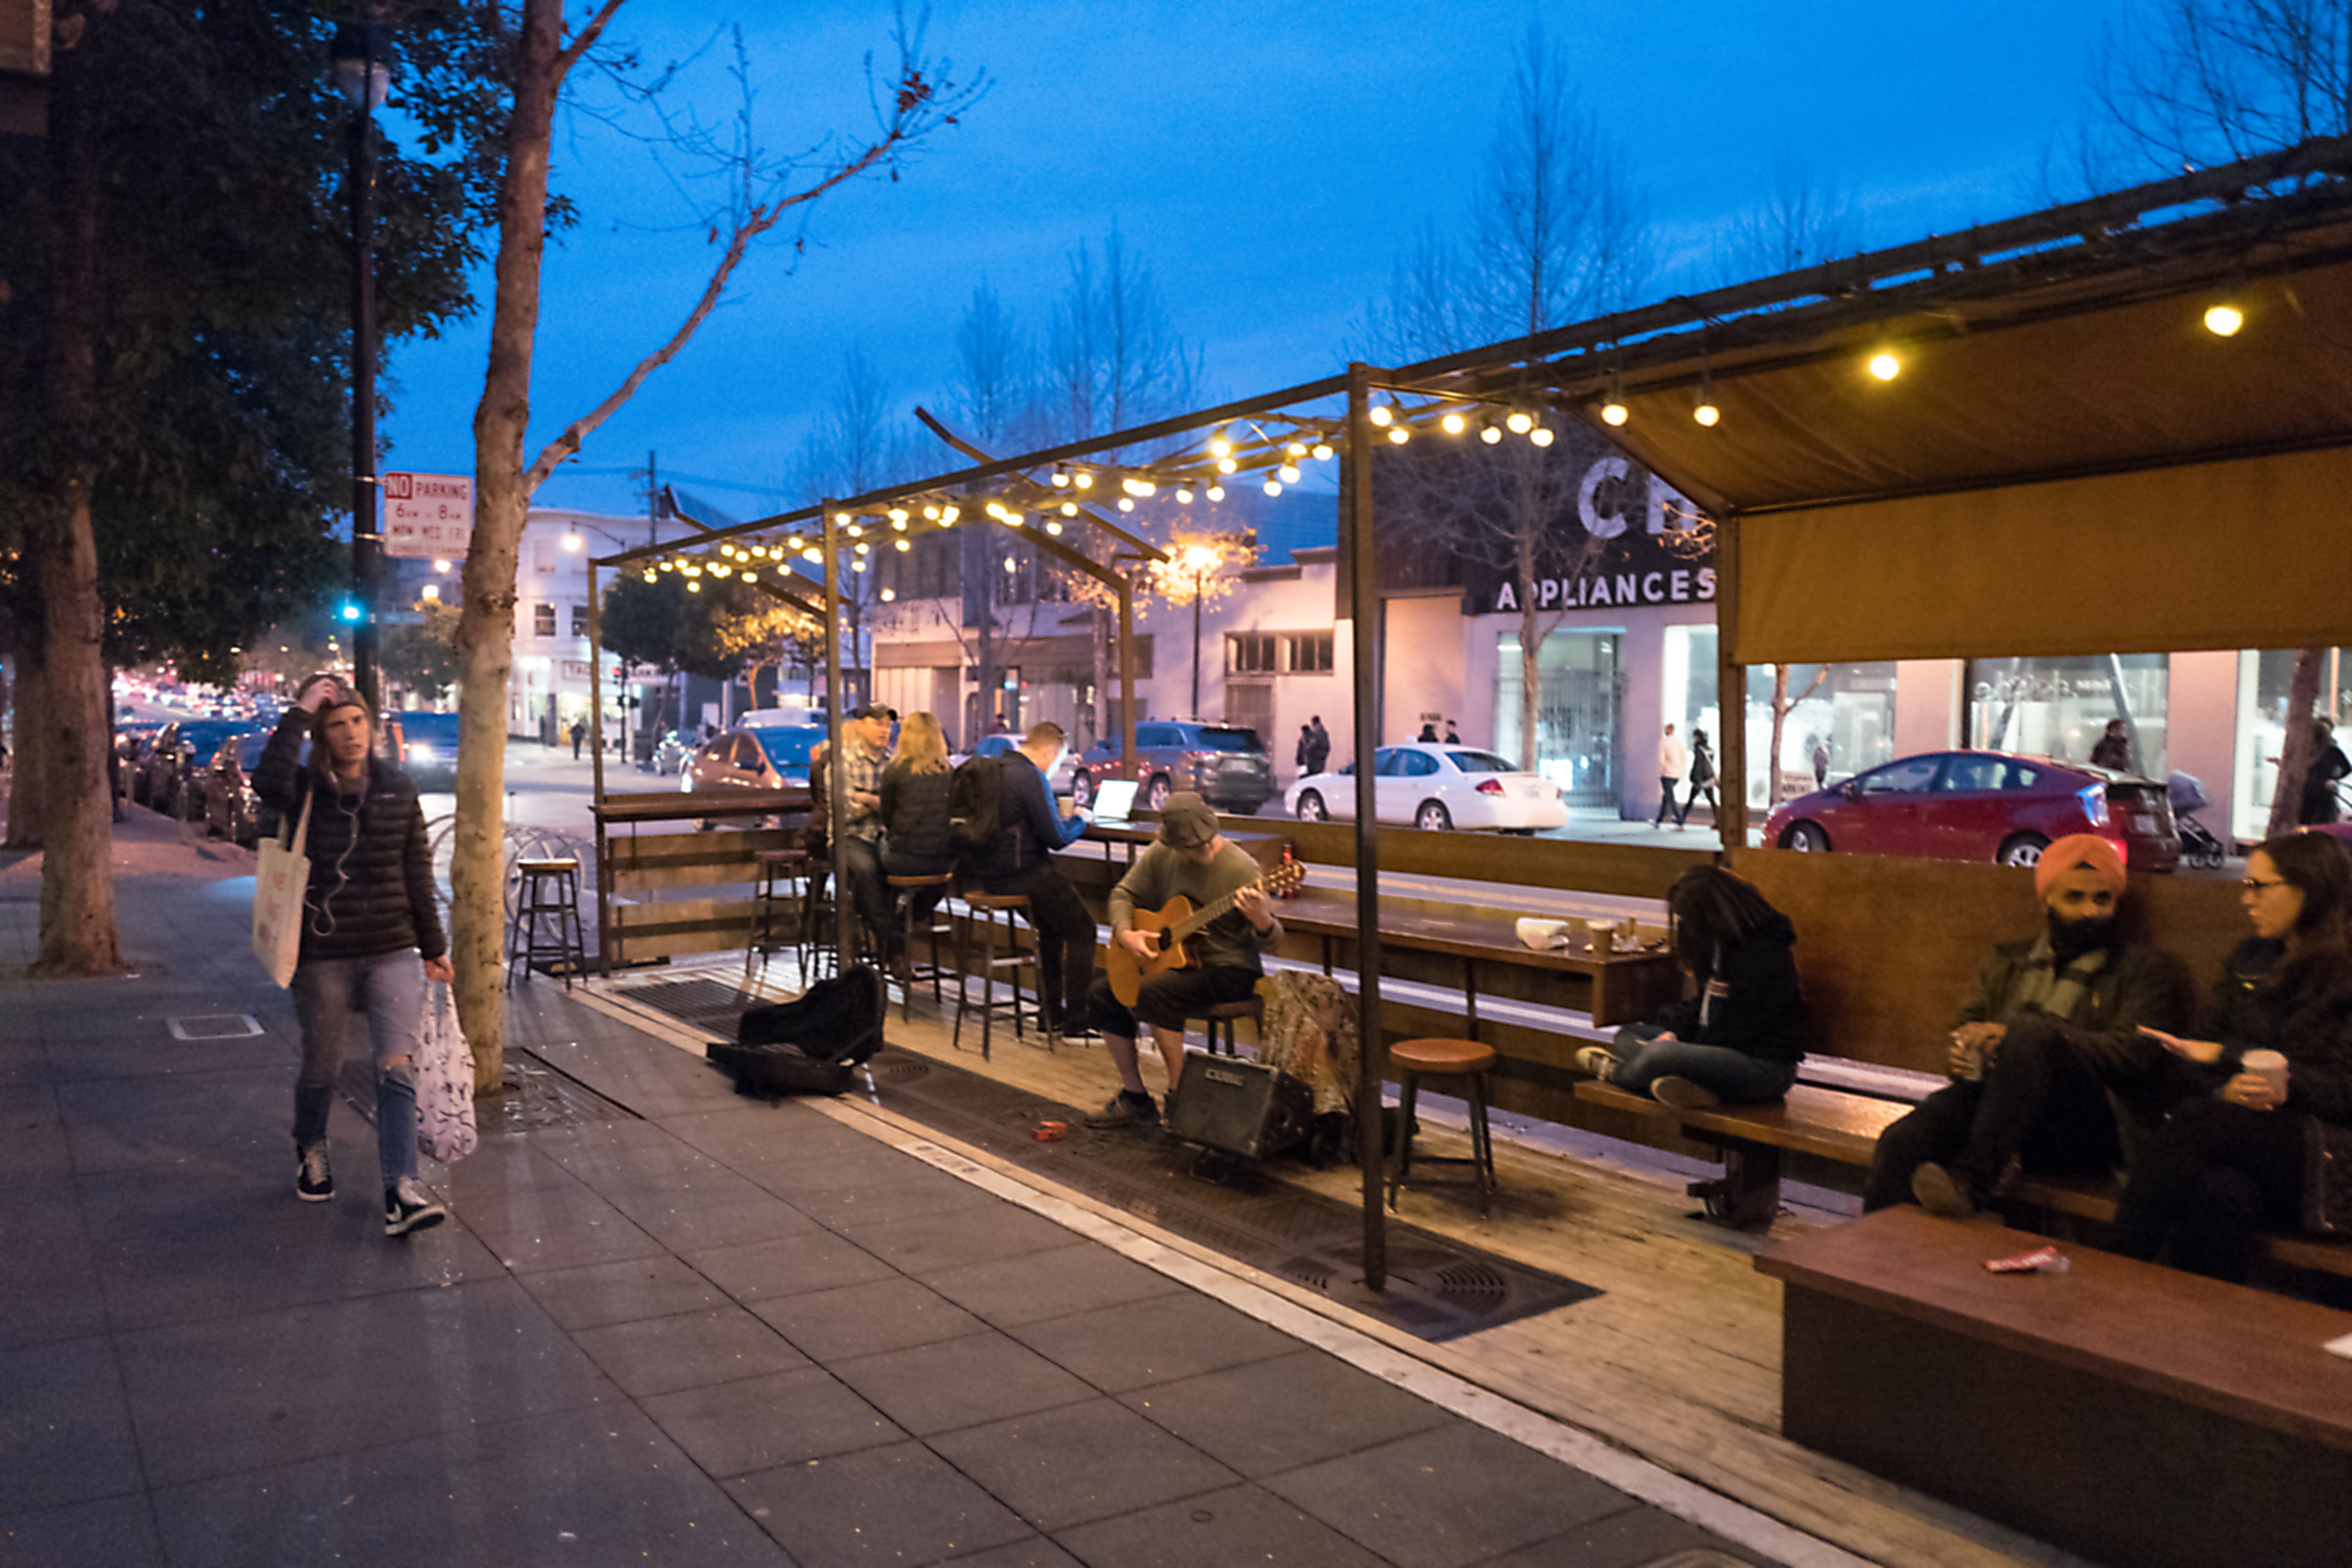 People walk past a public parklet where a street musician performs on Valencia street at dusk.